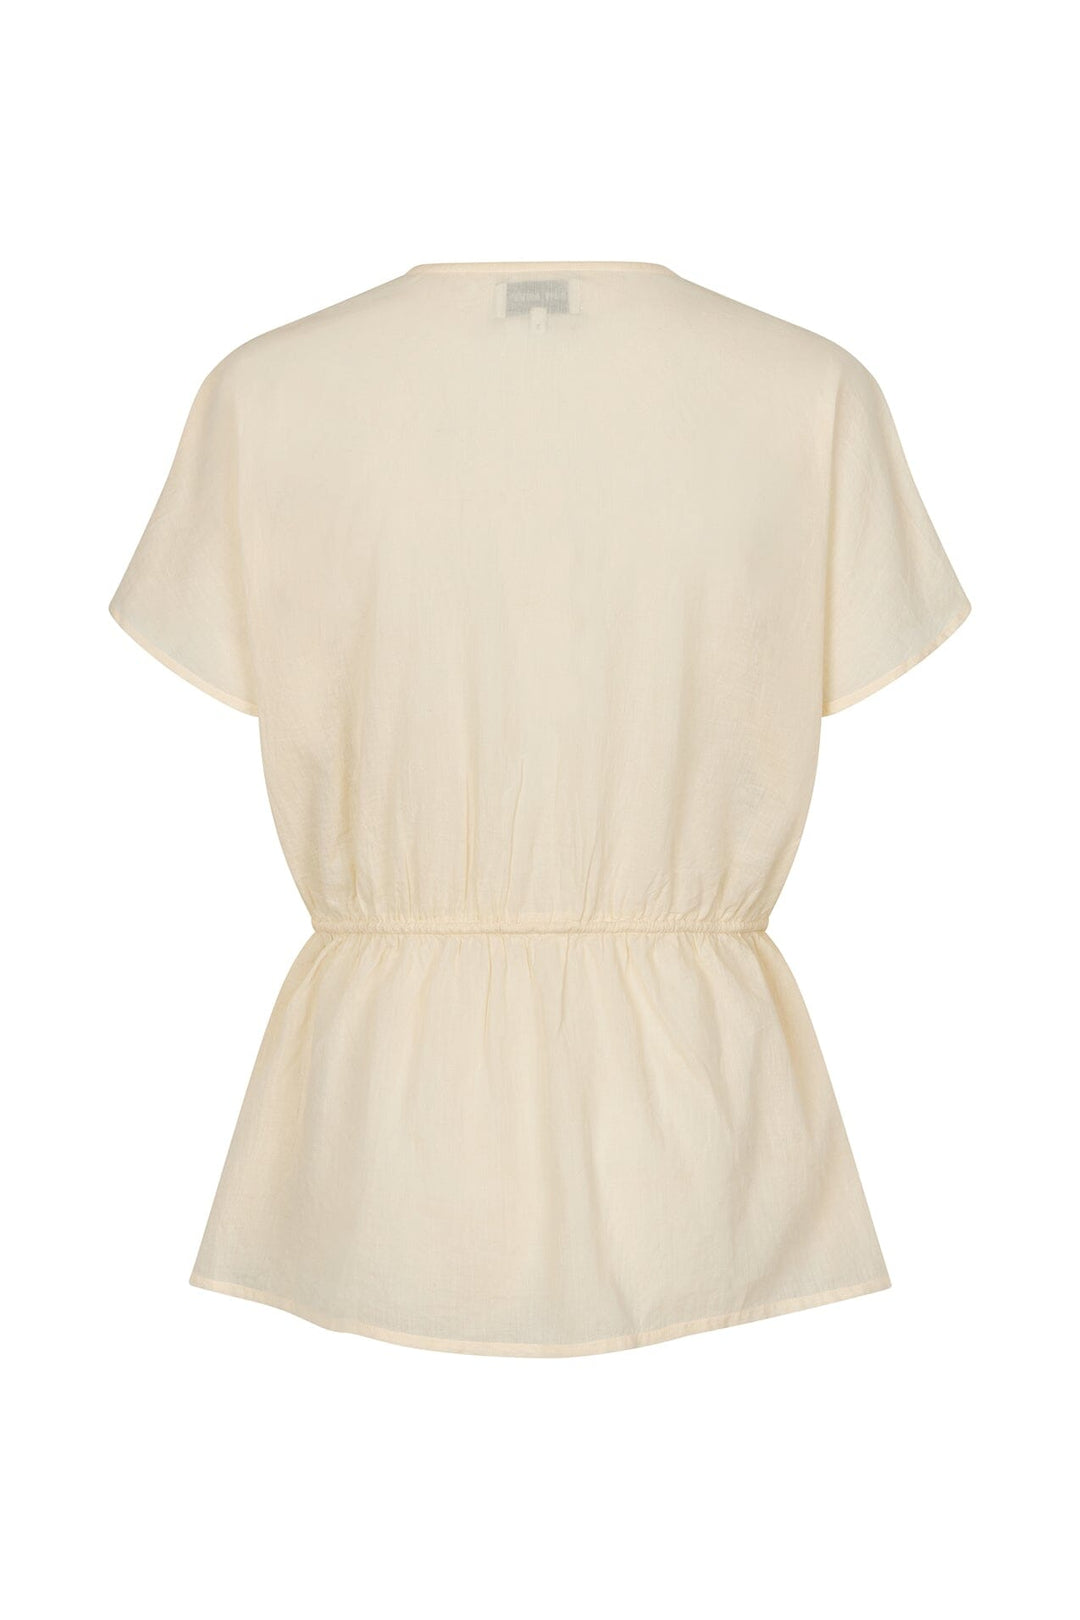 Lollys Laundry - EastonLL Top SL 24288-1050 - 02 Creme Toppe 